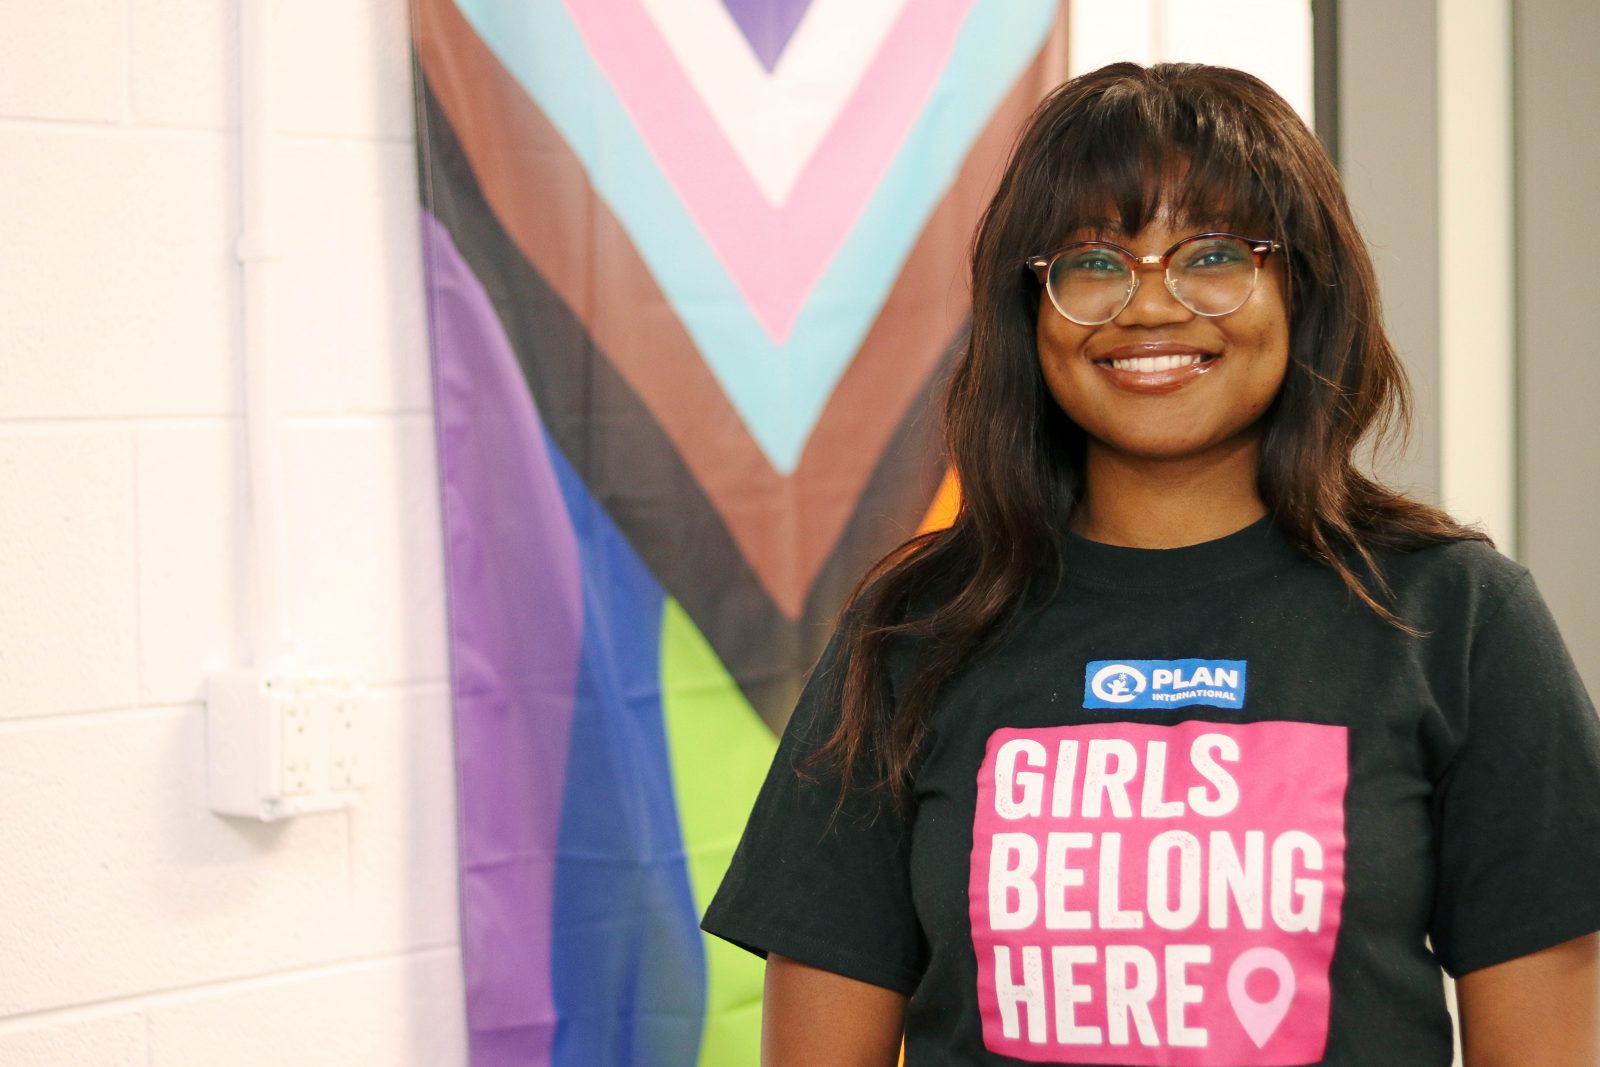 Eve Nyambiya wears a shirt that reads 'Girls Belong Here'. She is standing in front of the modern Pride flag, which includes stripes to represent the experiences of People of Colour, as well as stripes to represent people who identify as transgender, gender nonconforming and/or undefined.